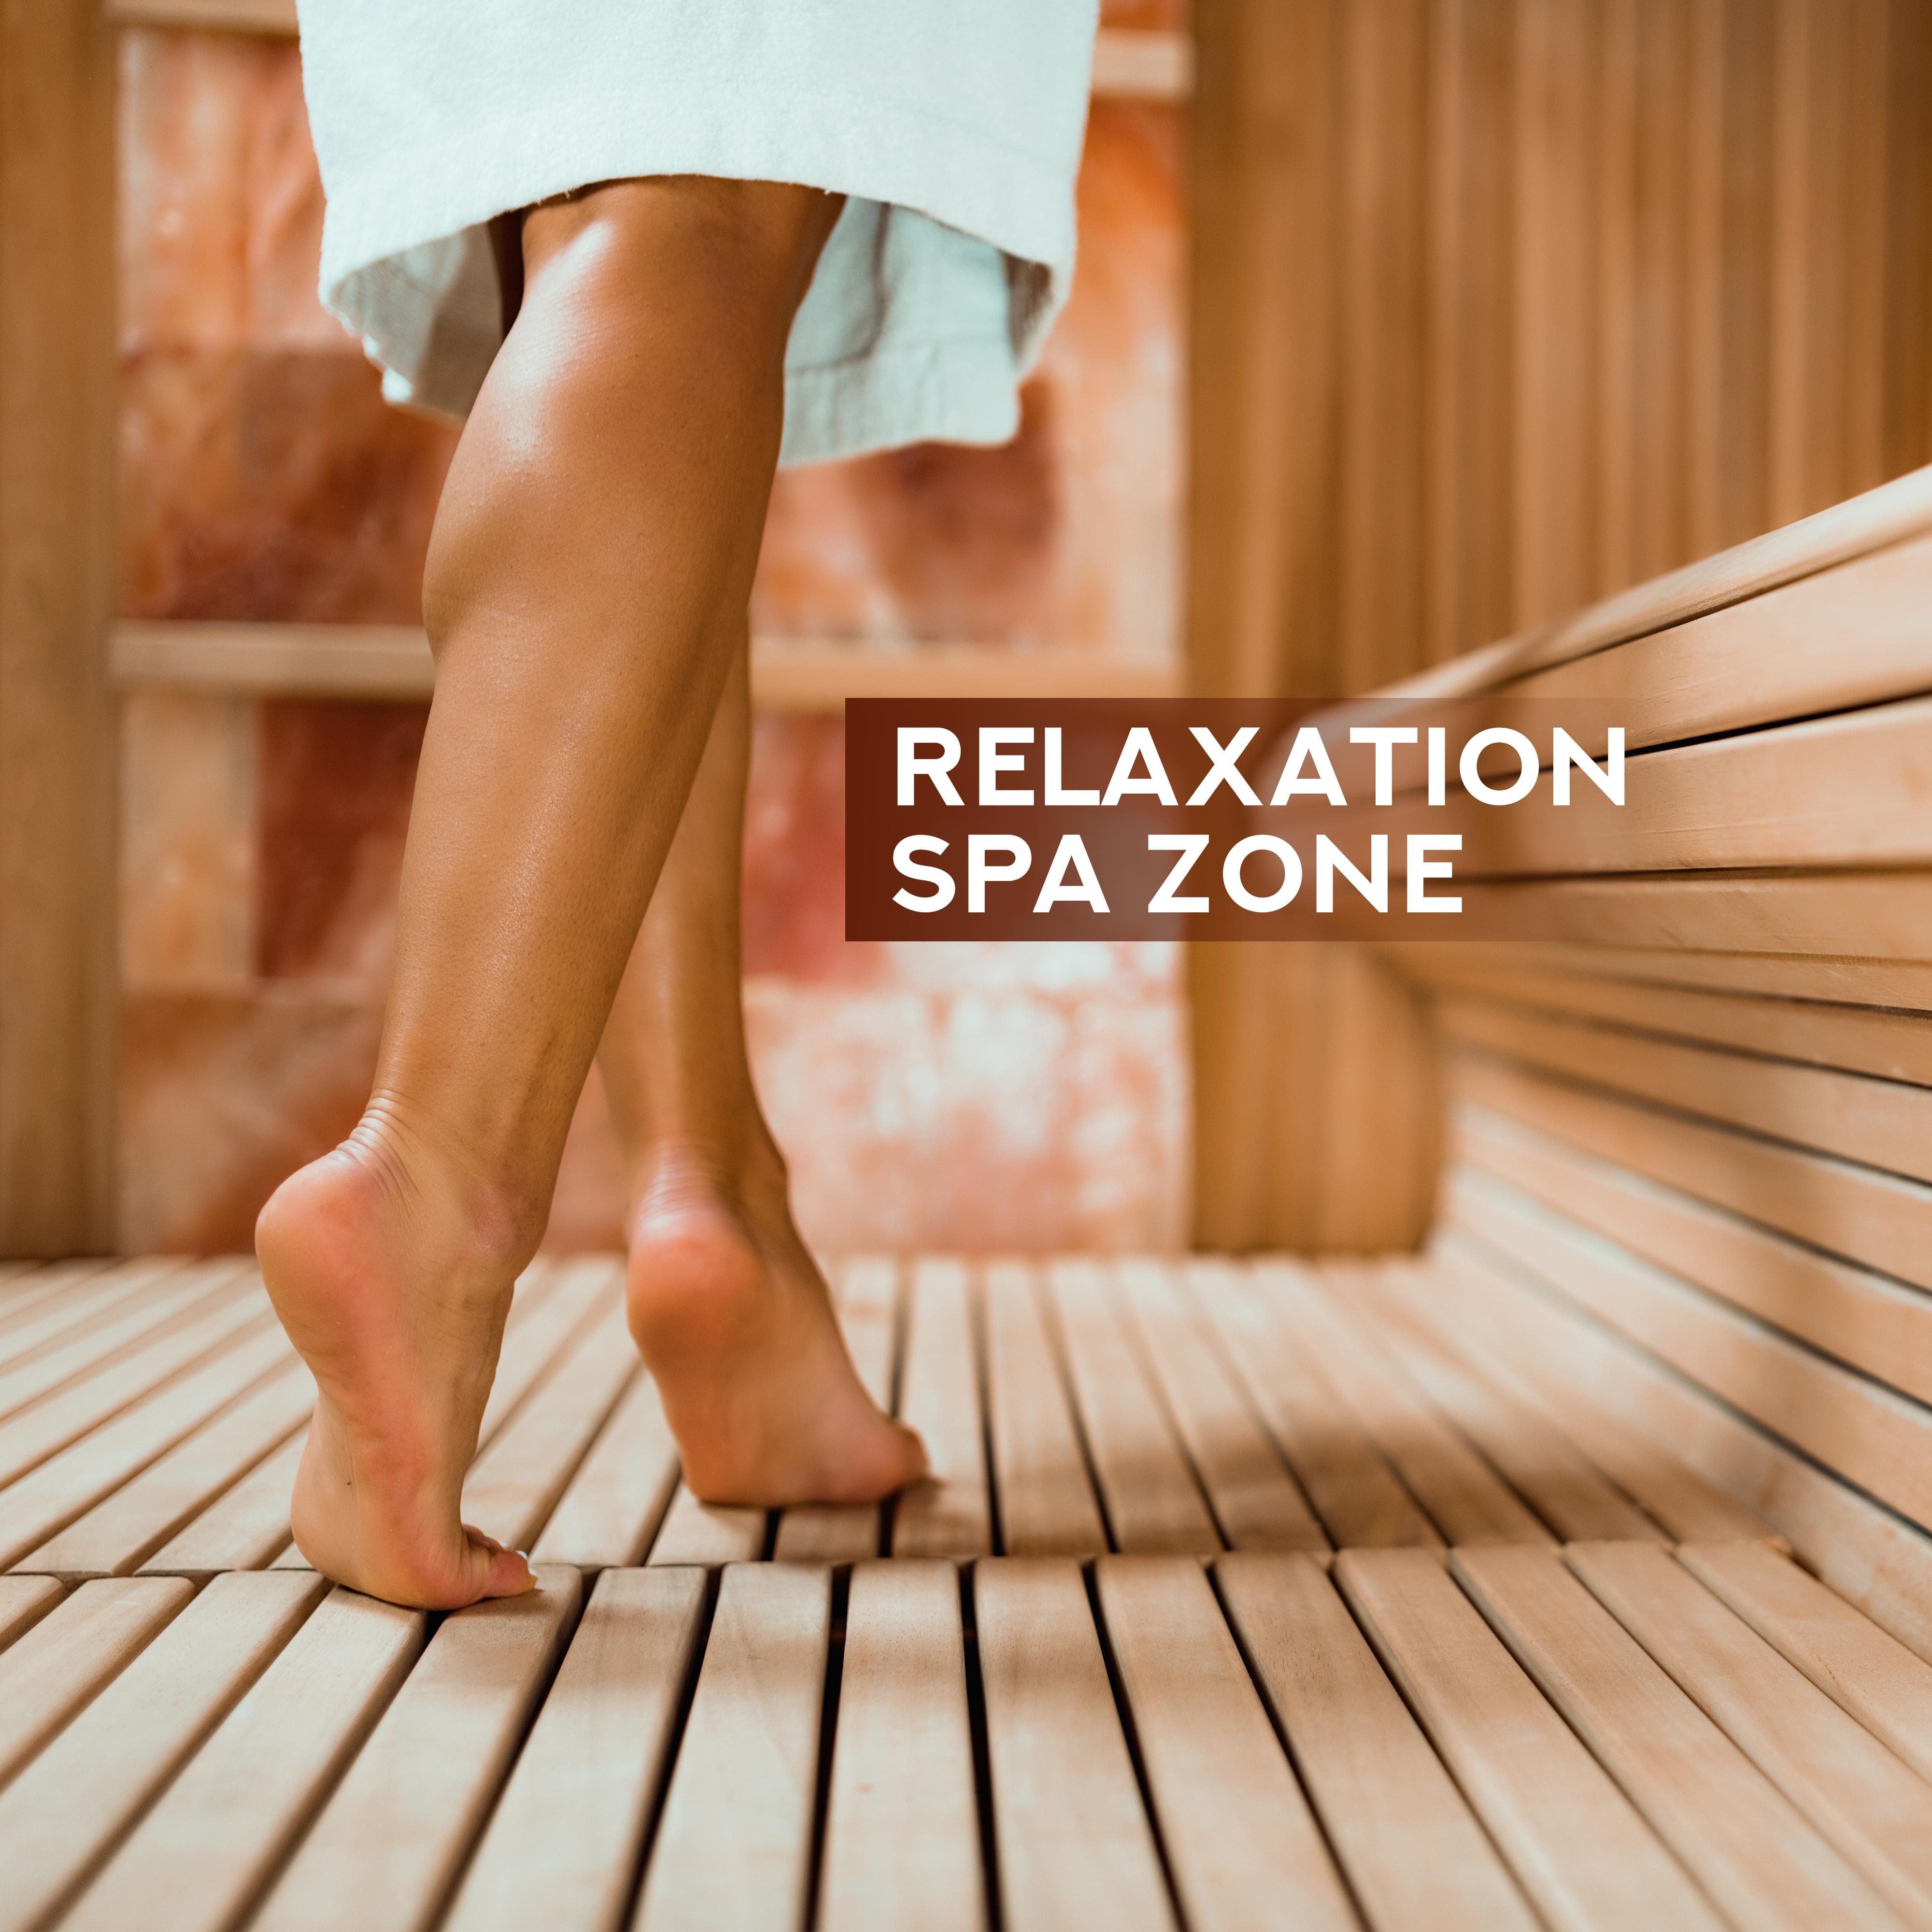 Relaxation Spa Zone – New Age Music for Massage, Spa & Wellness, Sleep, Deep Harmony, Stress Relief, Zen, Lounge Music, Pure Relaxation